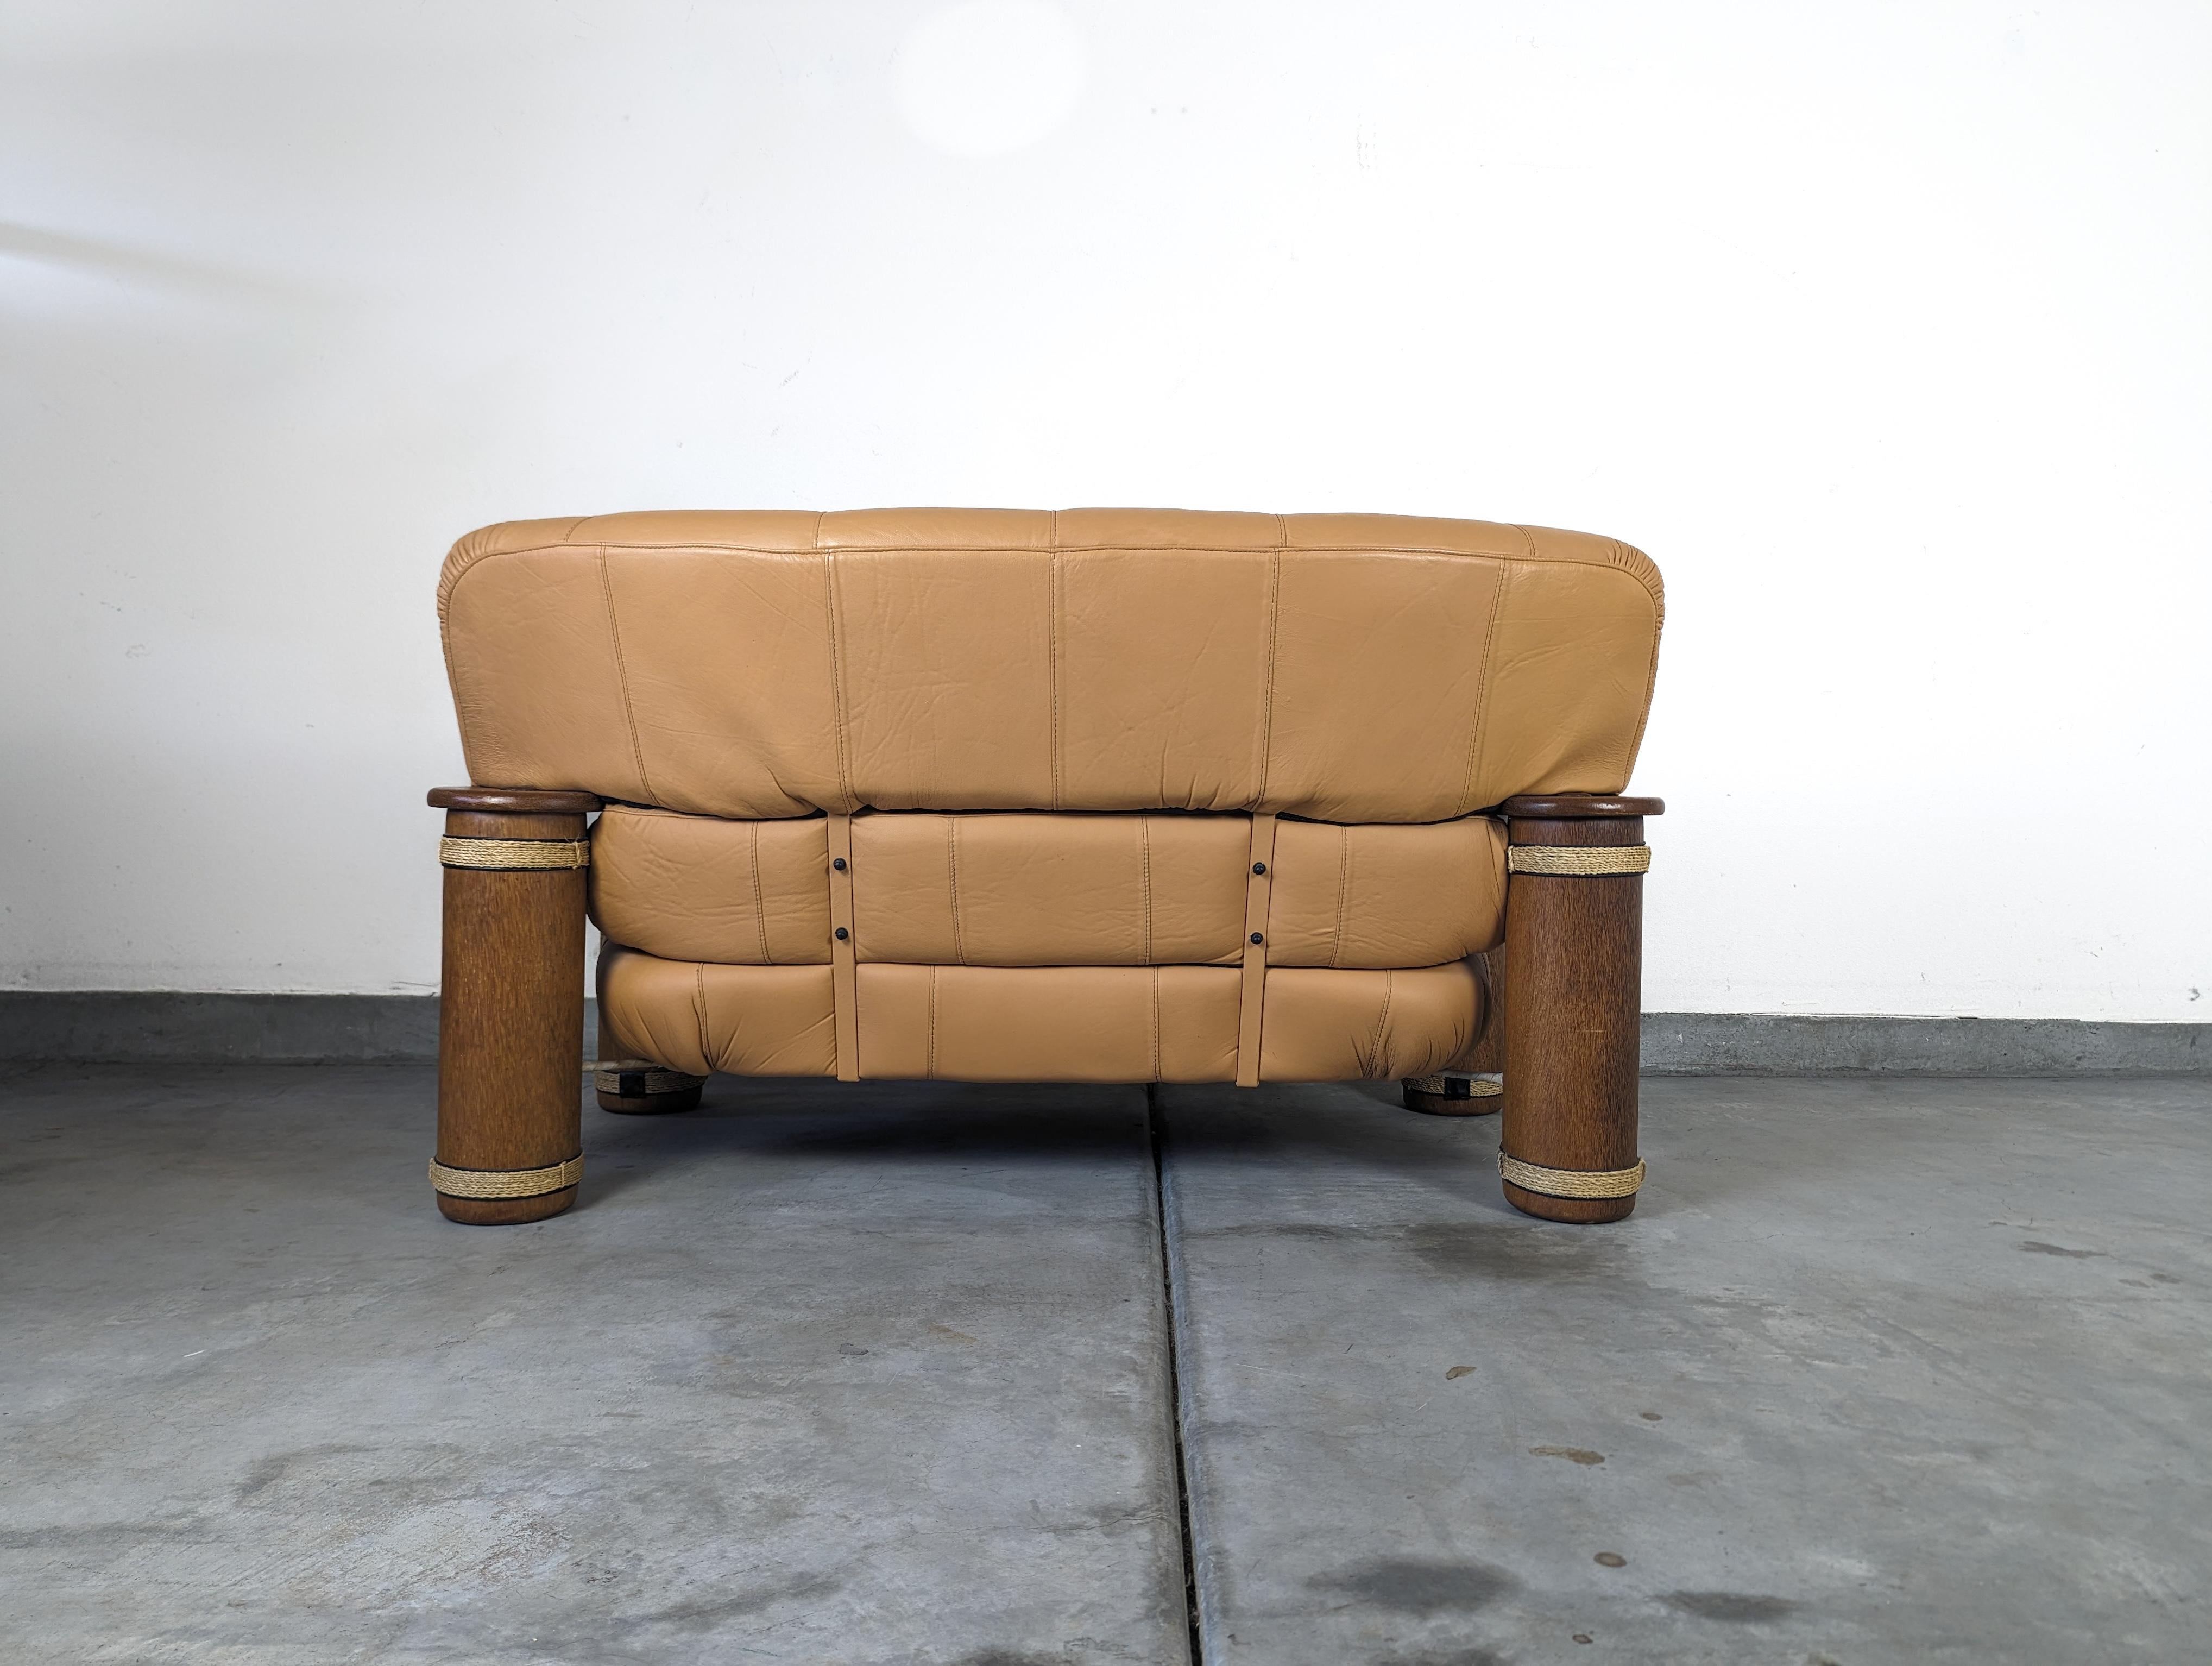 Organic Modern Vintage Leather and Palmwood Loveseat Sofa by Pacific Green, c1990s For Sale